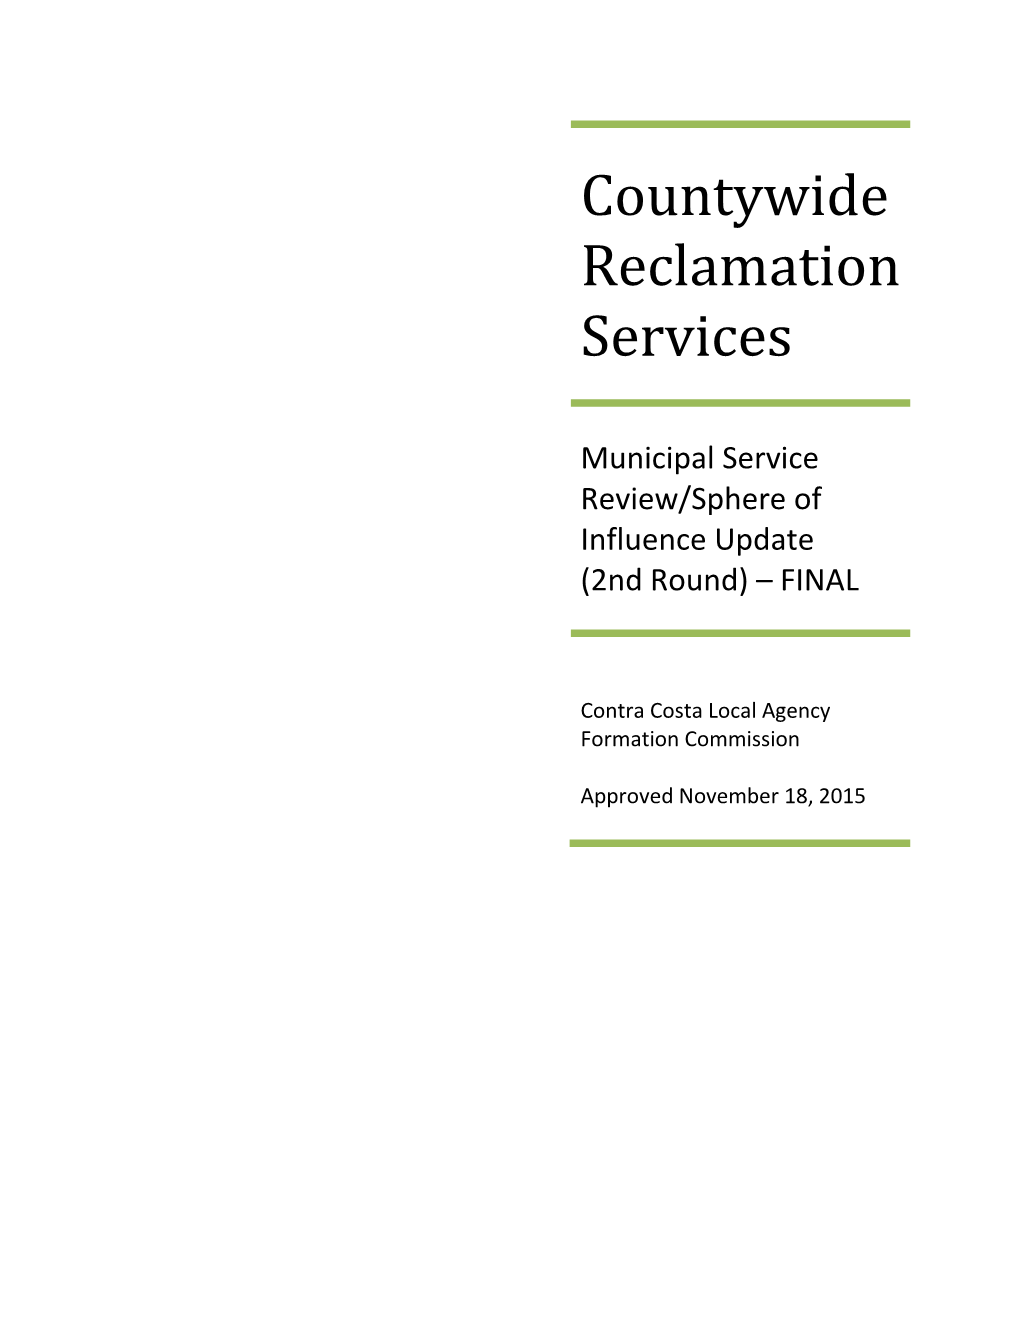 Countywide Reclamation Services